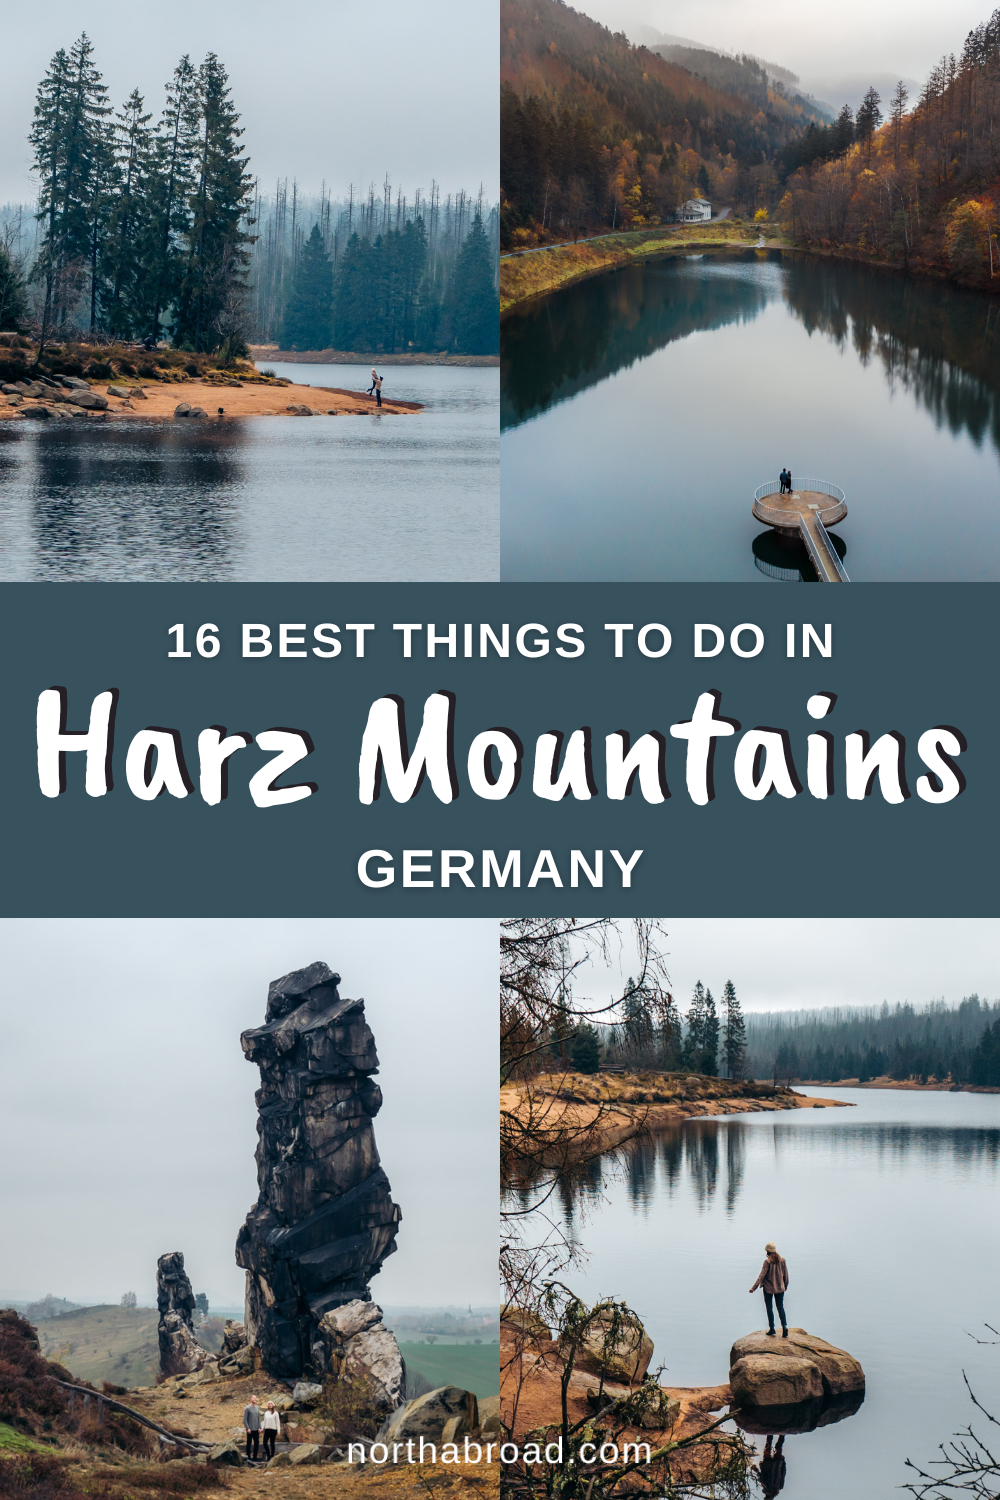 A Complete Travel Guide to the Harz Mountains in Germany: 16 Best Things to Do and See